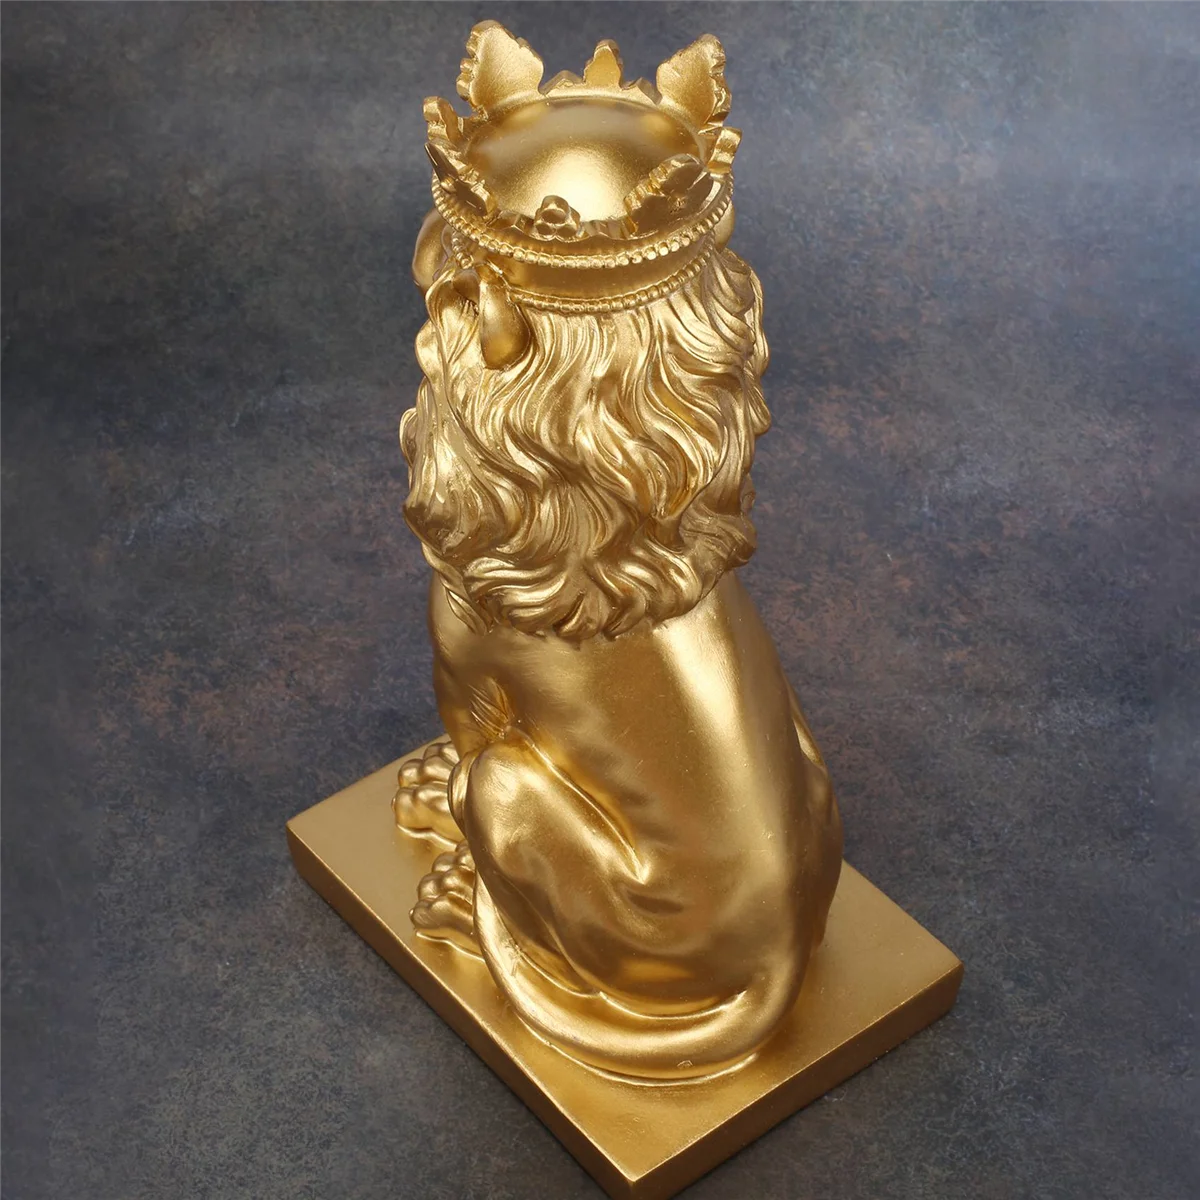 

Abstract Crown Lion Statue Home Office Bar Male Lion Faith Resin Sculpture Crafts Animal Art Decor Ornaments - Gold